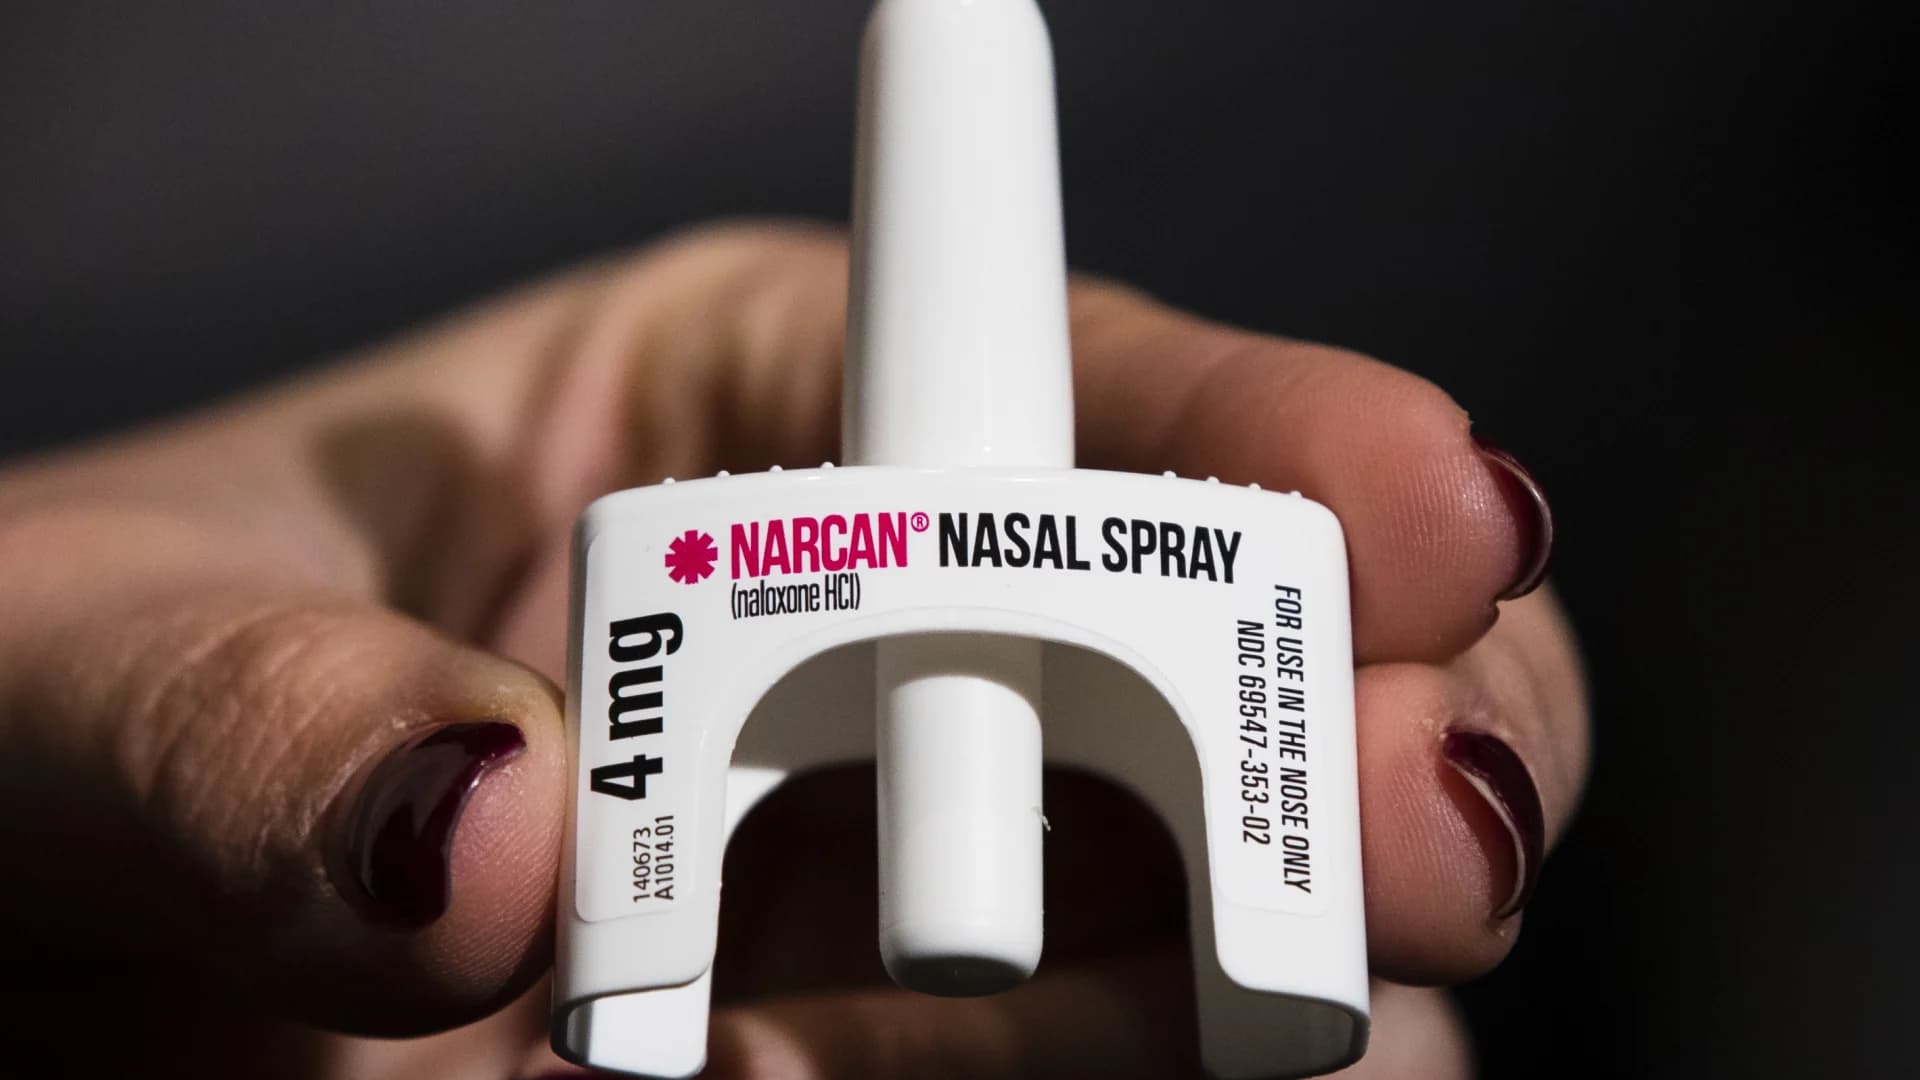 FDA approves over-the-counter Narcan; here's what it means